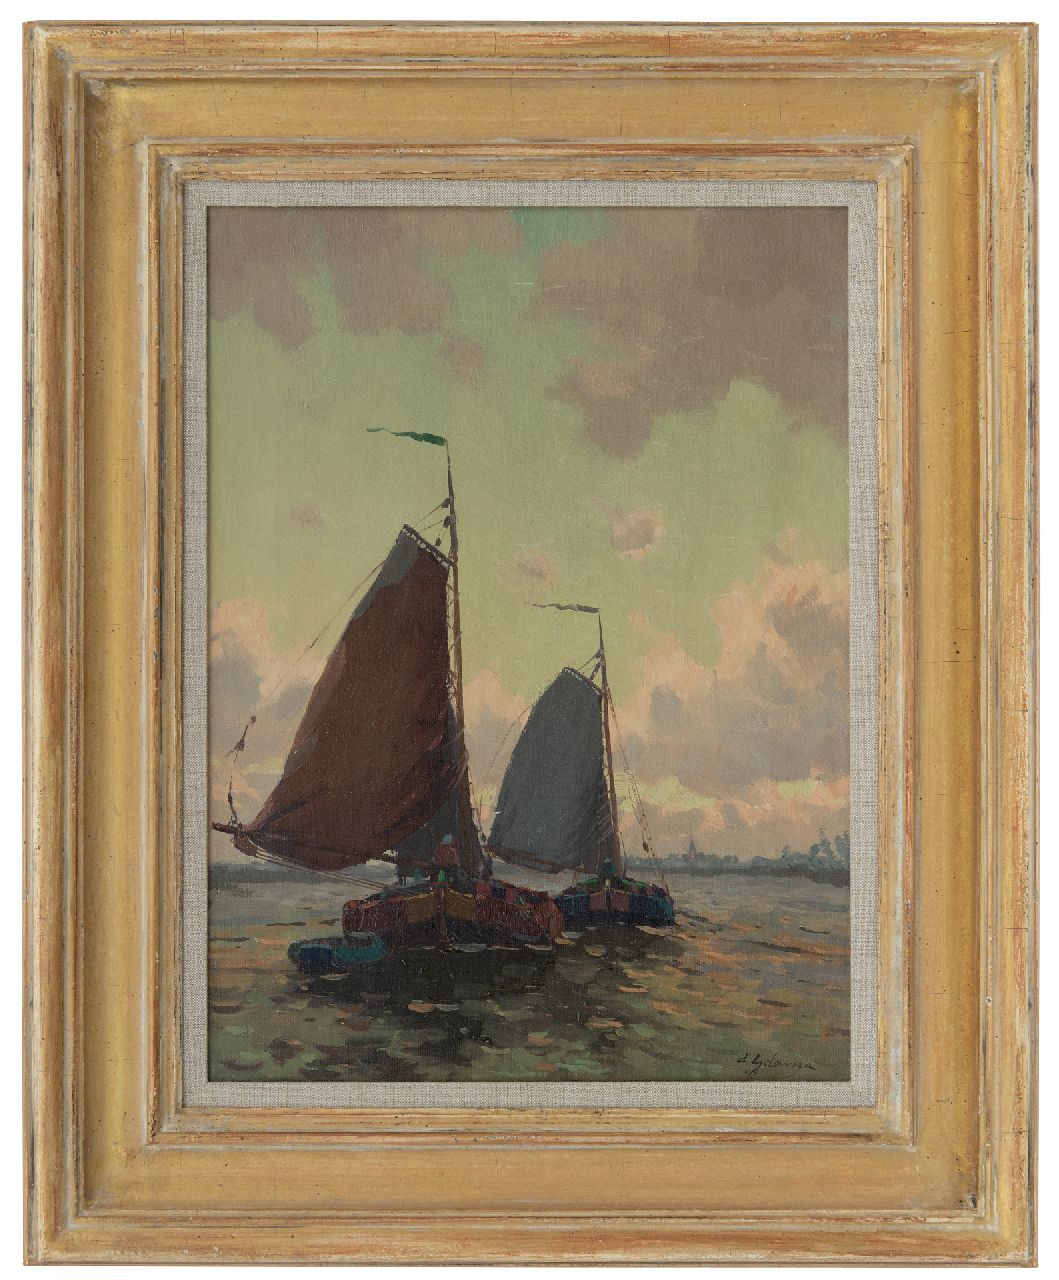 Ydema E.  | Egnatius Ydema | Paintings offered for sale | Barges on their way home, oil on canvas 40.5 x 30.5 cm, signed l.r.